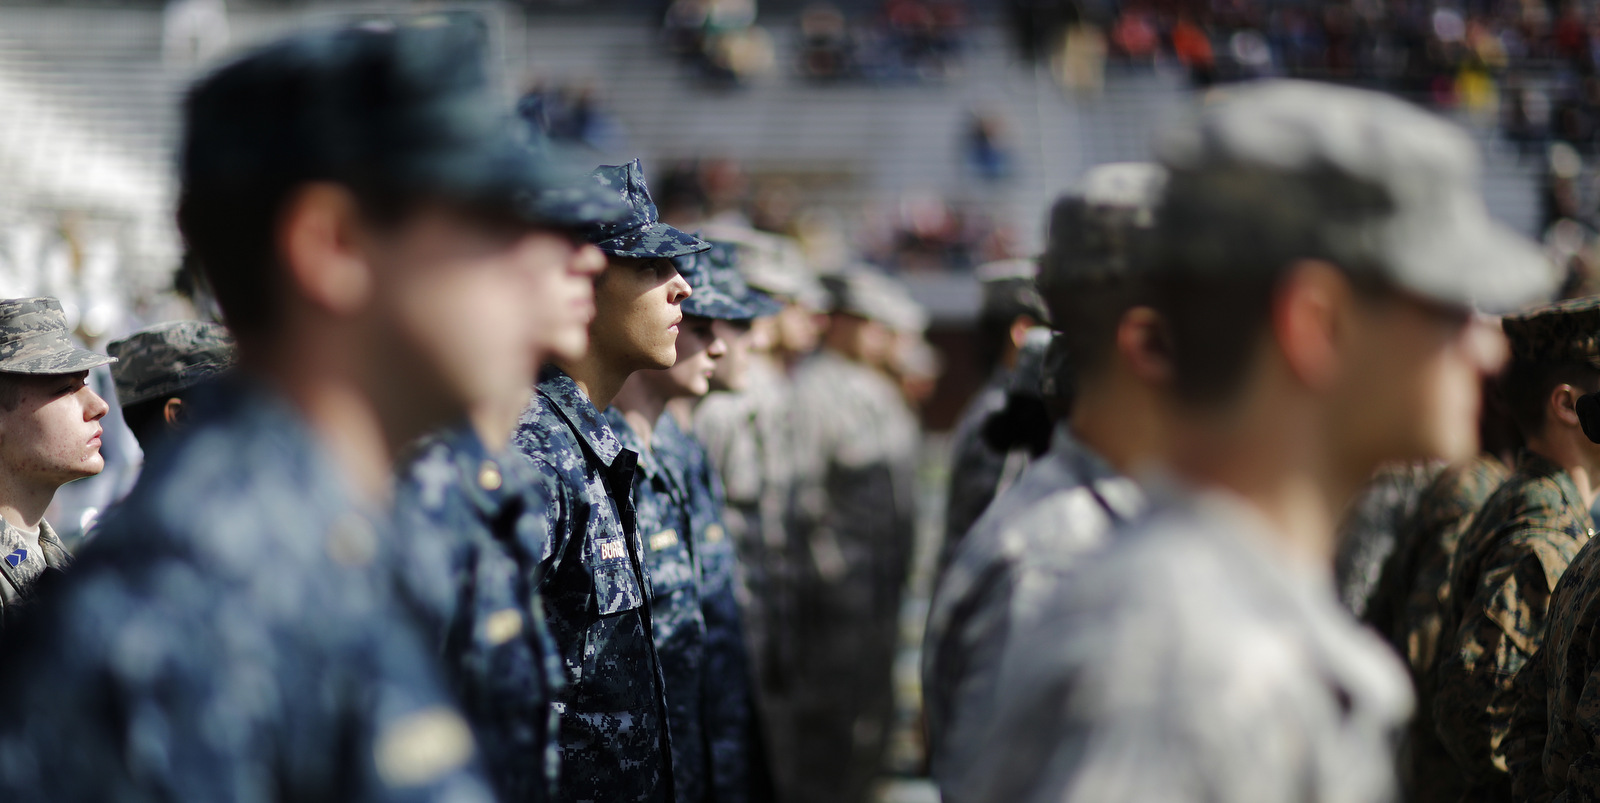 Members of the Georgia Tech ROTC take the field before the playing of the national anthem on Veterans Day at an NCAA college football game between Georgia Tech and Virginia Tech in Atlanta, Nov. 11, 2017. (AP/David Goldman)